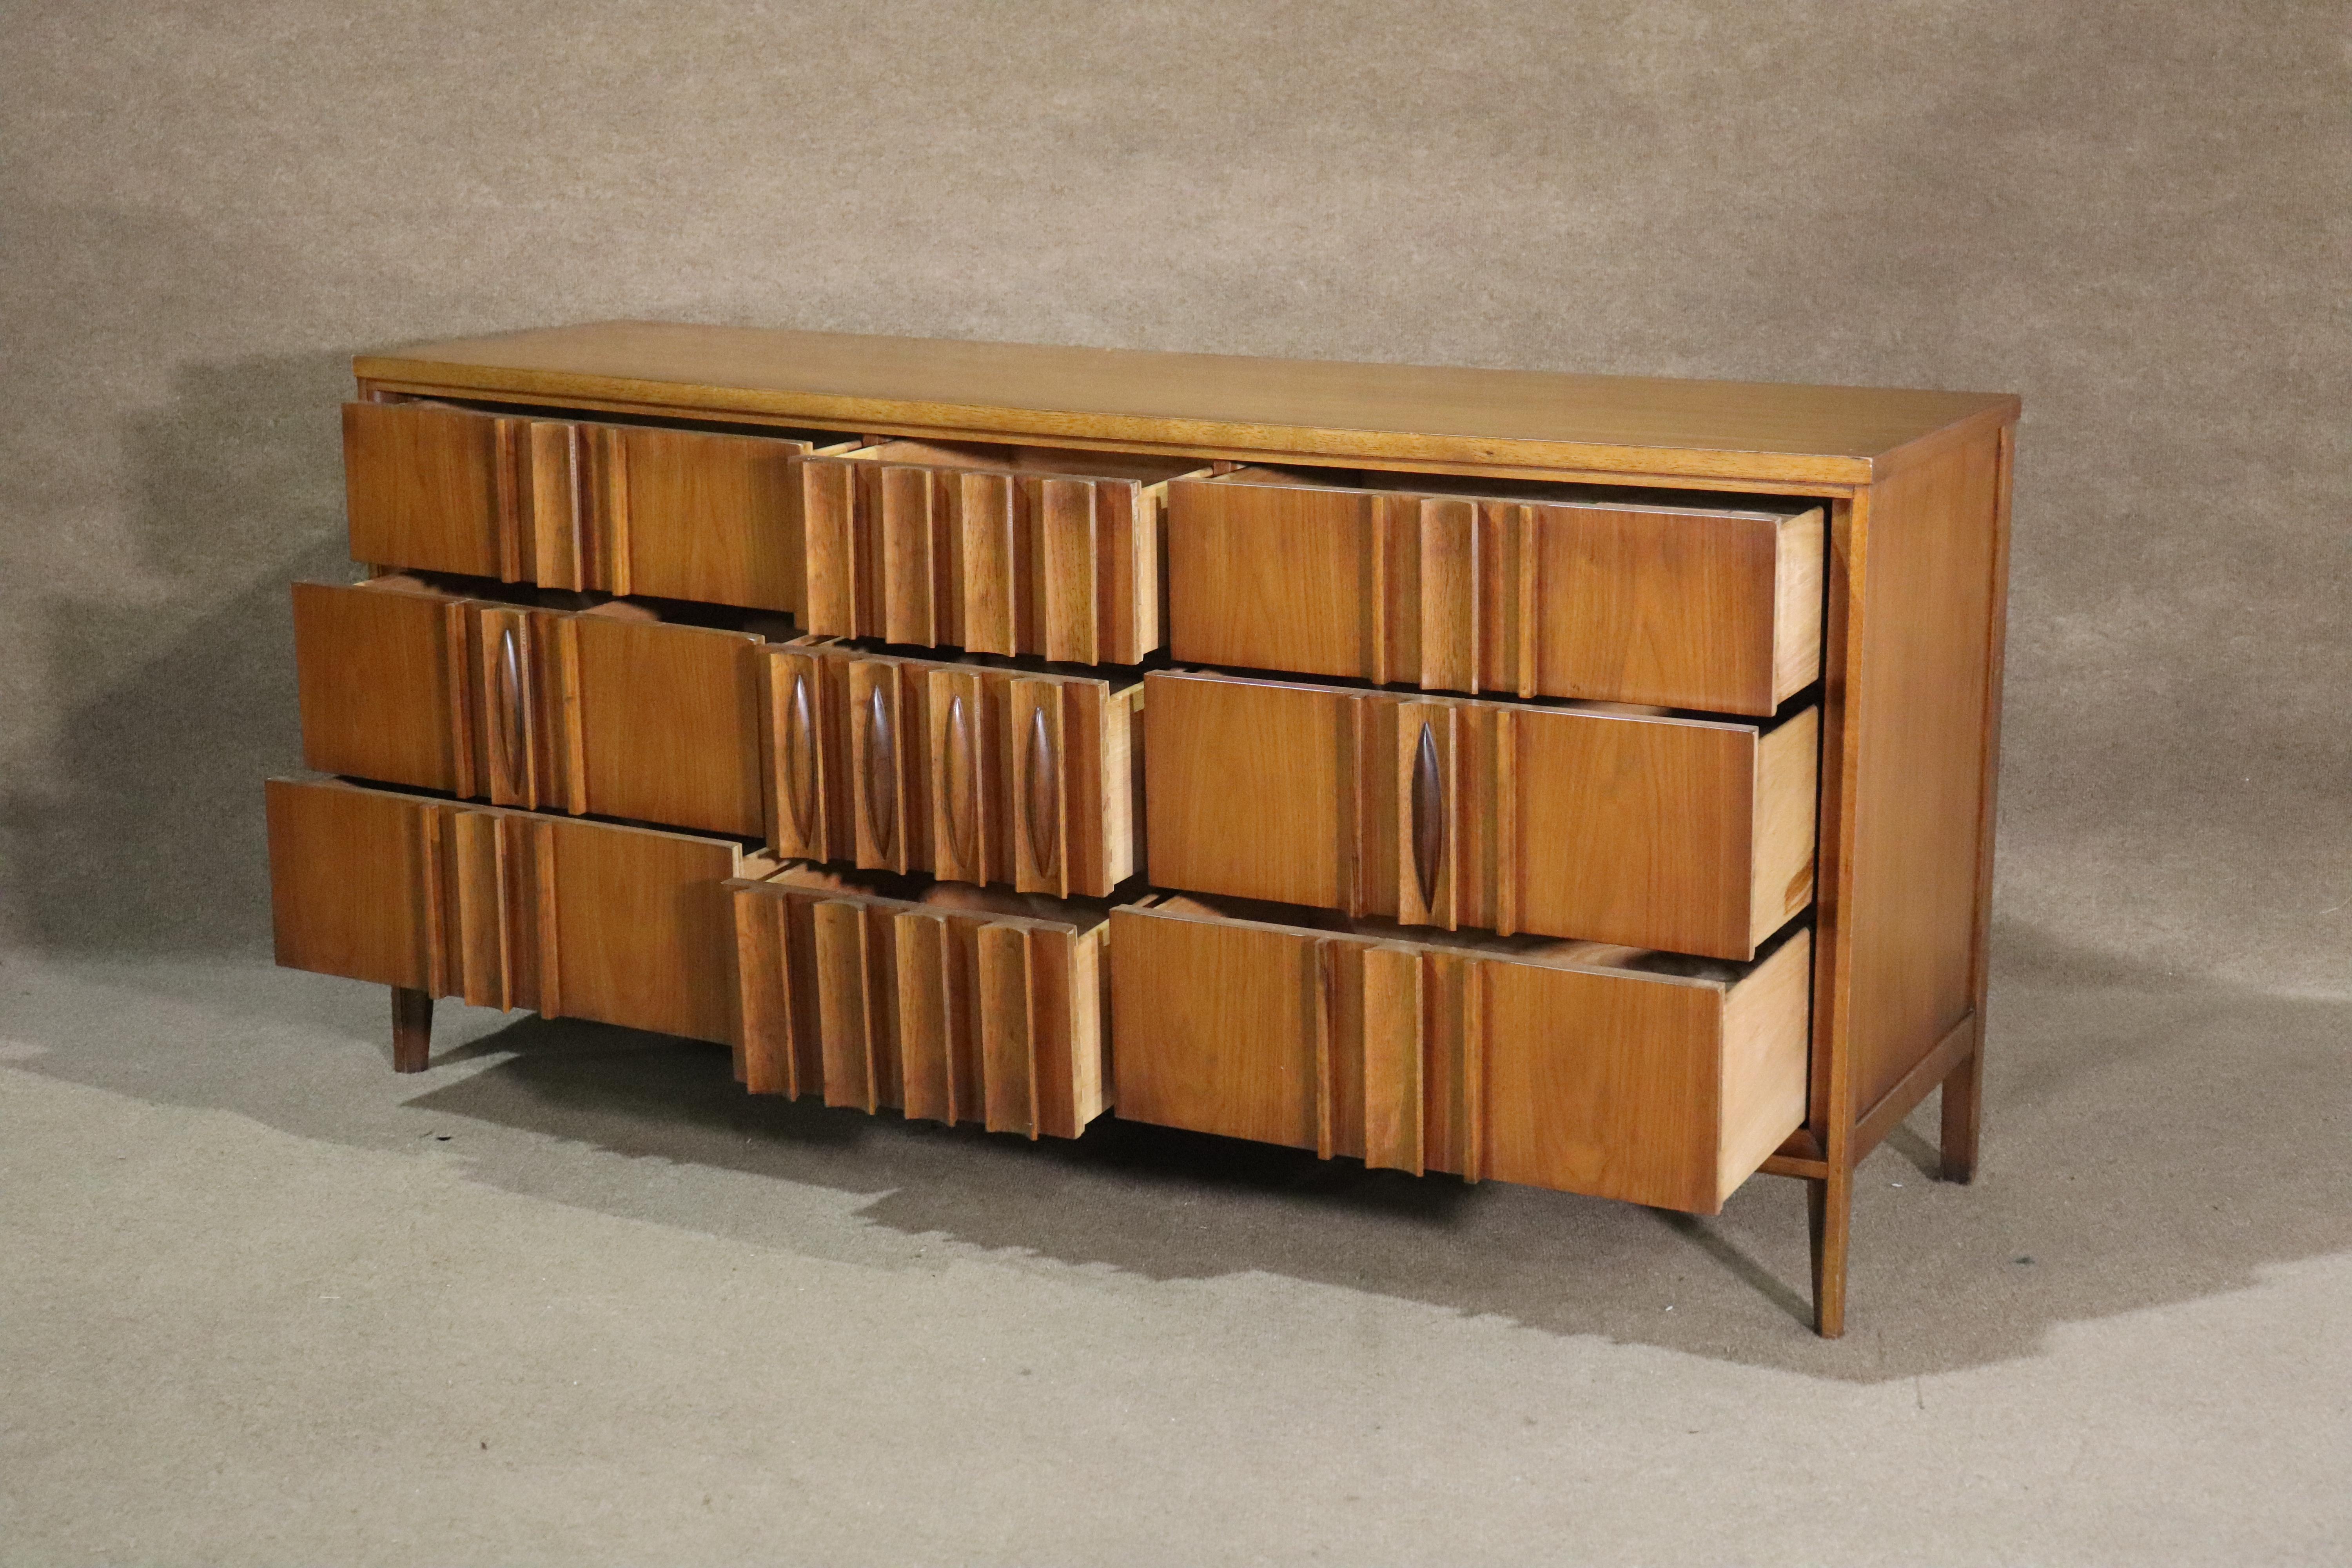 Mid-century modern long dresser by Thomasville. Nine total drawers with sculpted front and warm walnut grain.
Please confirm location NY or NJ